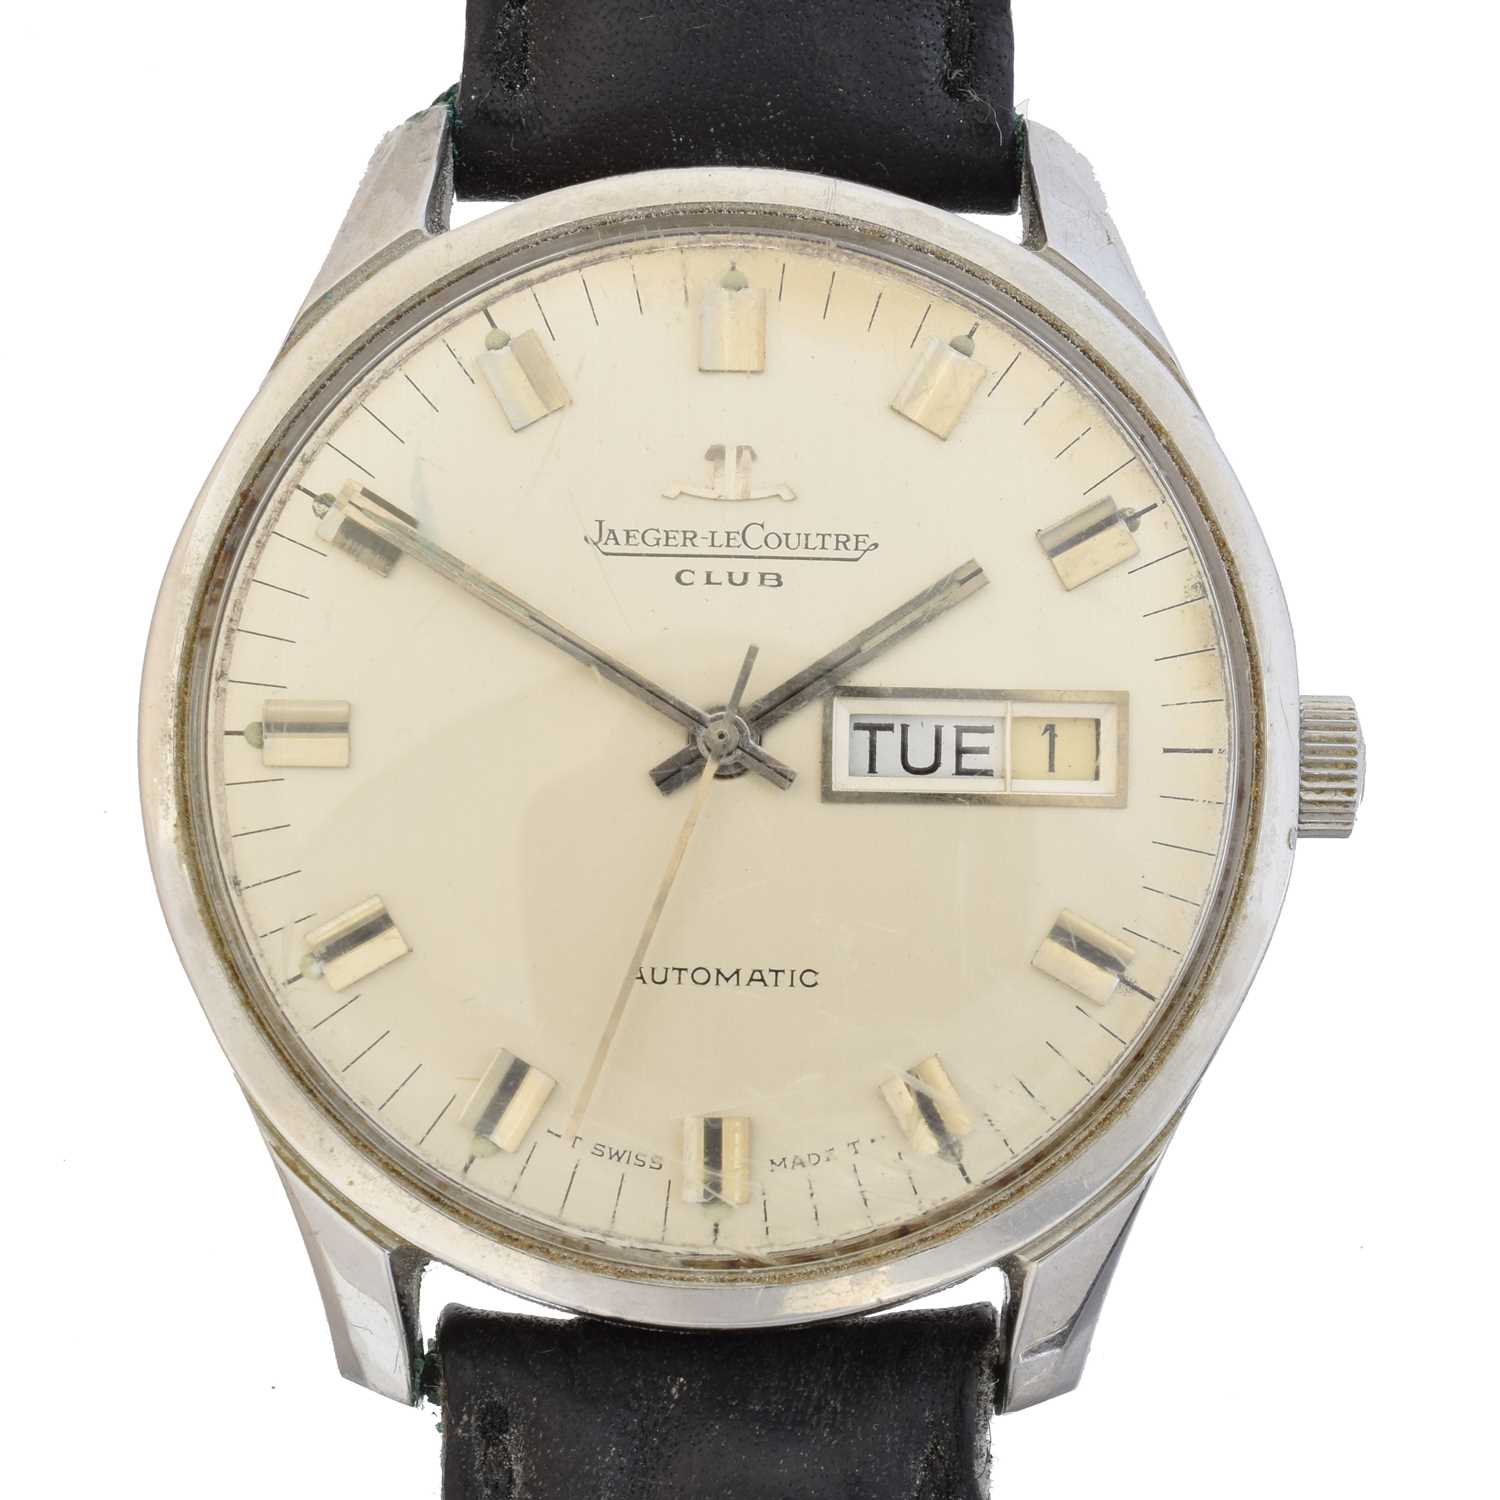 Lot 115 - A Jaeger-LeCoultre Club automatic watch,